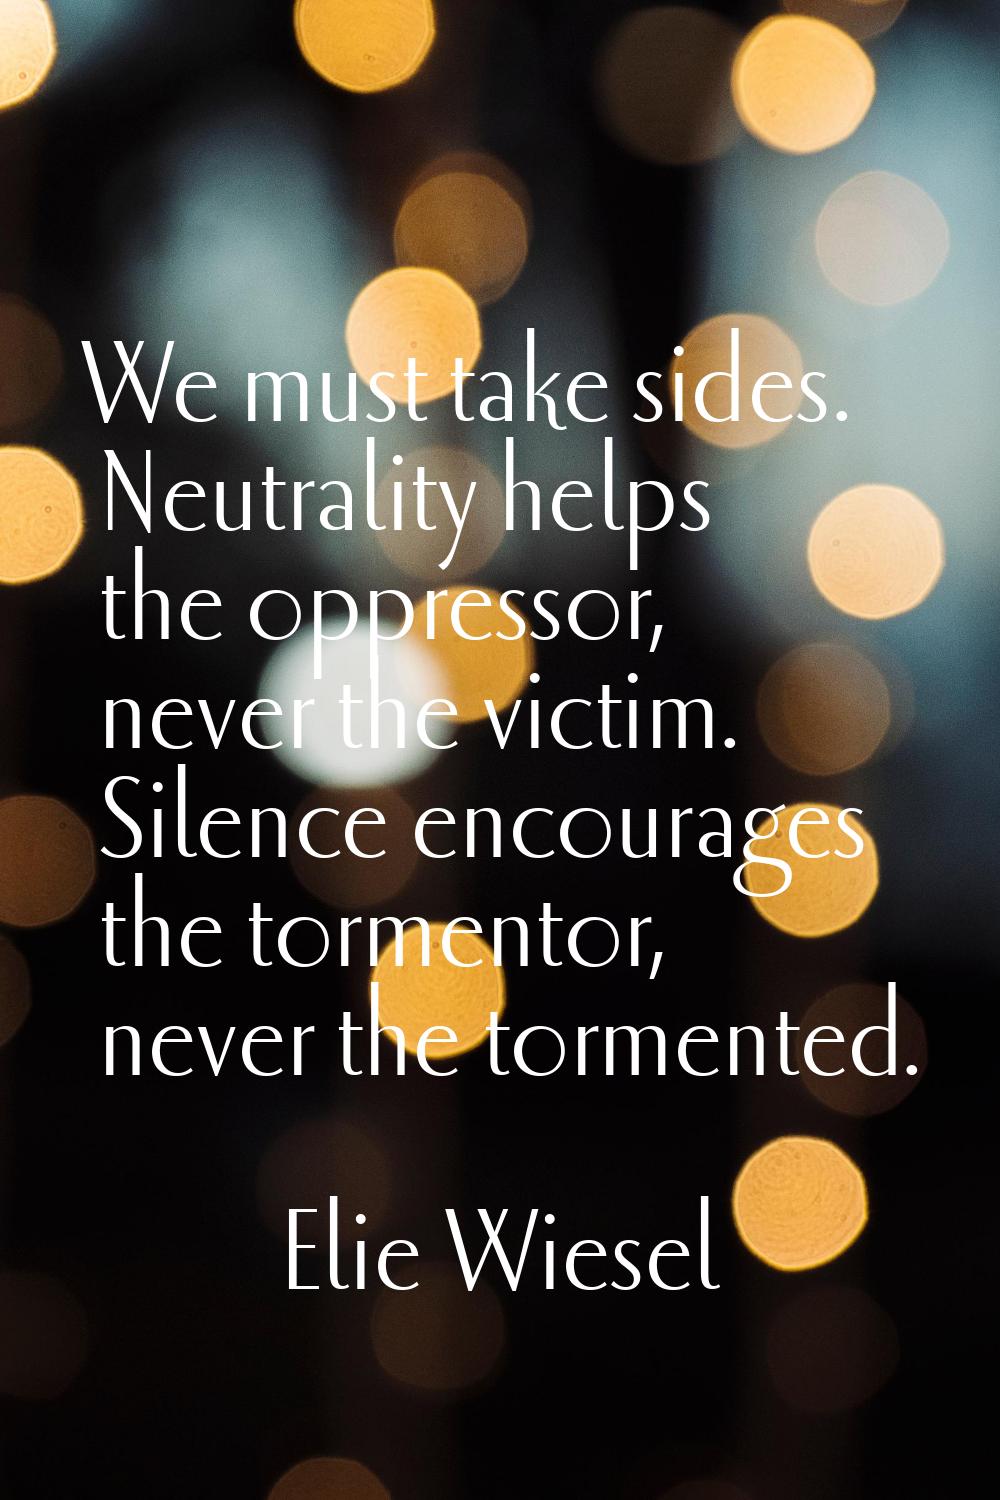 We must take sides. Neutrality helps the oppressor, never the victim. Silence encourages the tormen